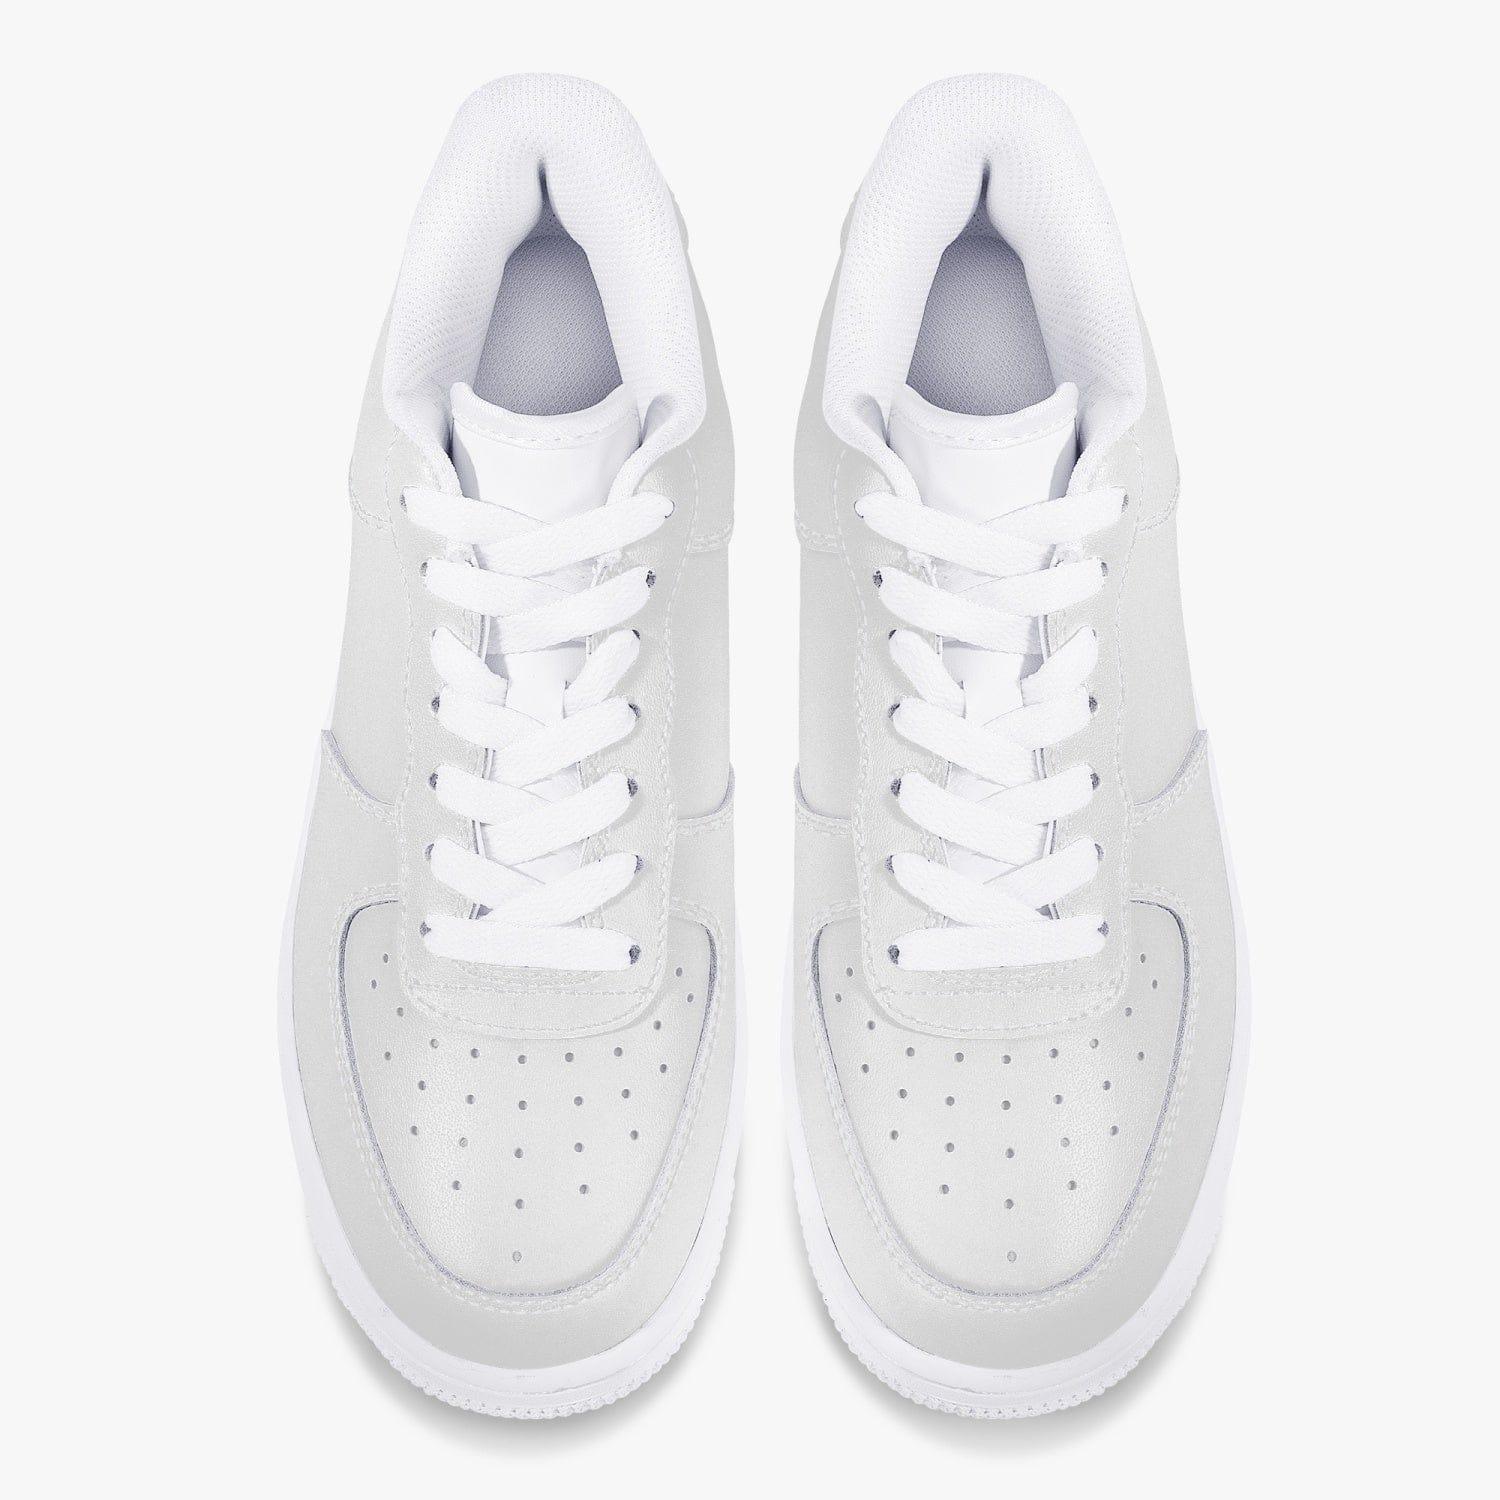 mobe Low-Top Leather Sneakers - mo.be